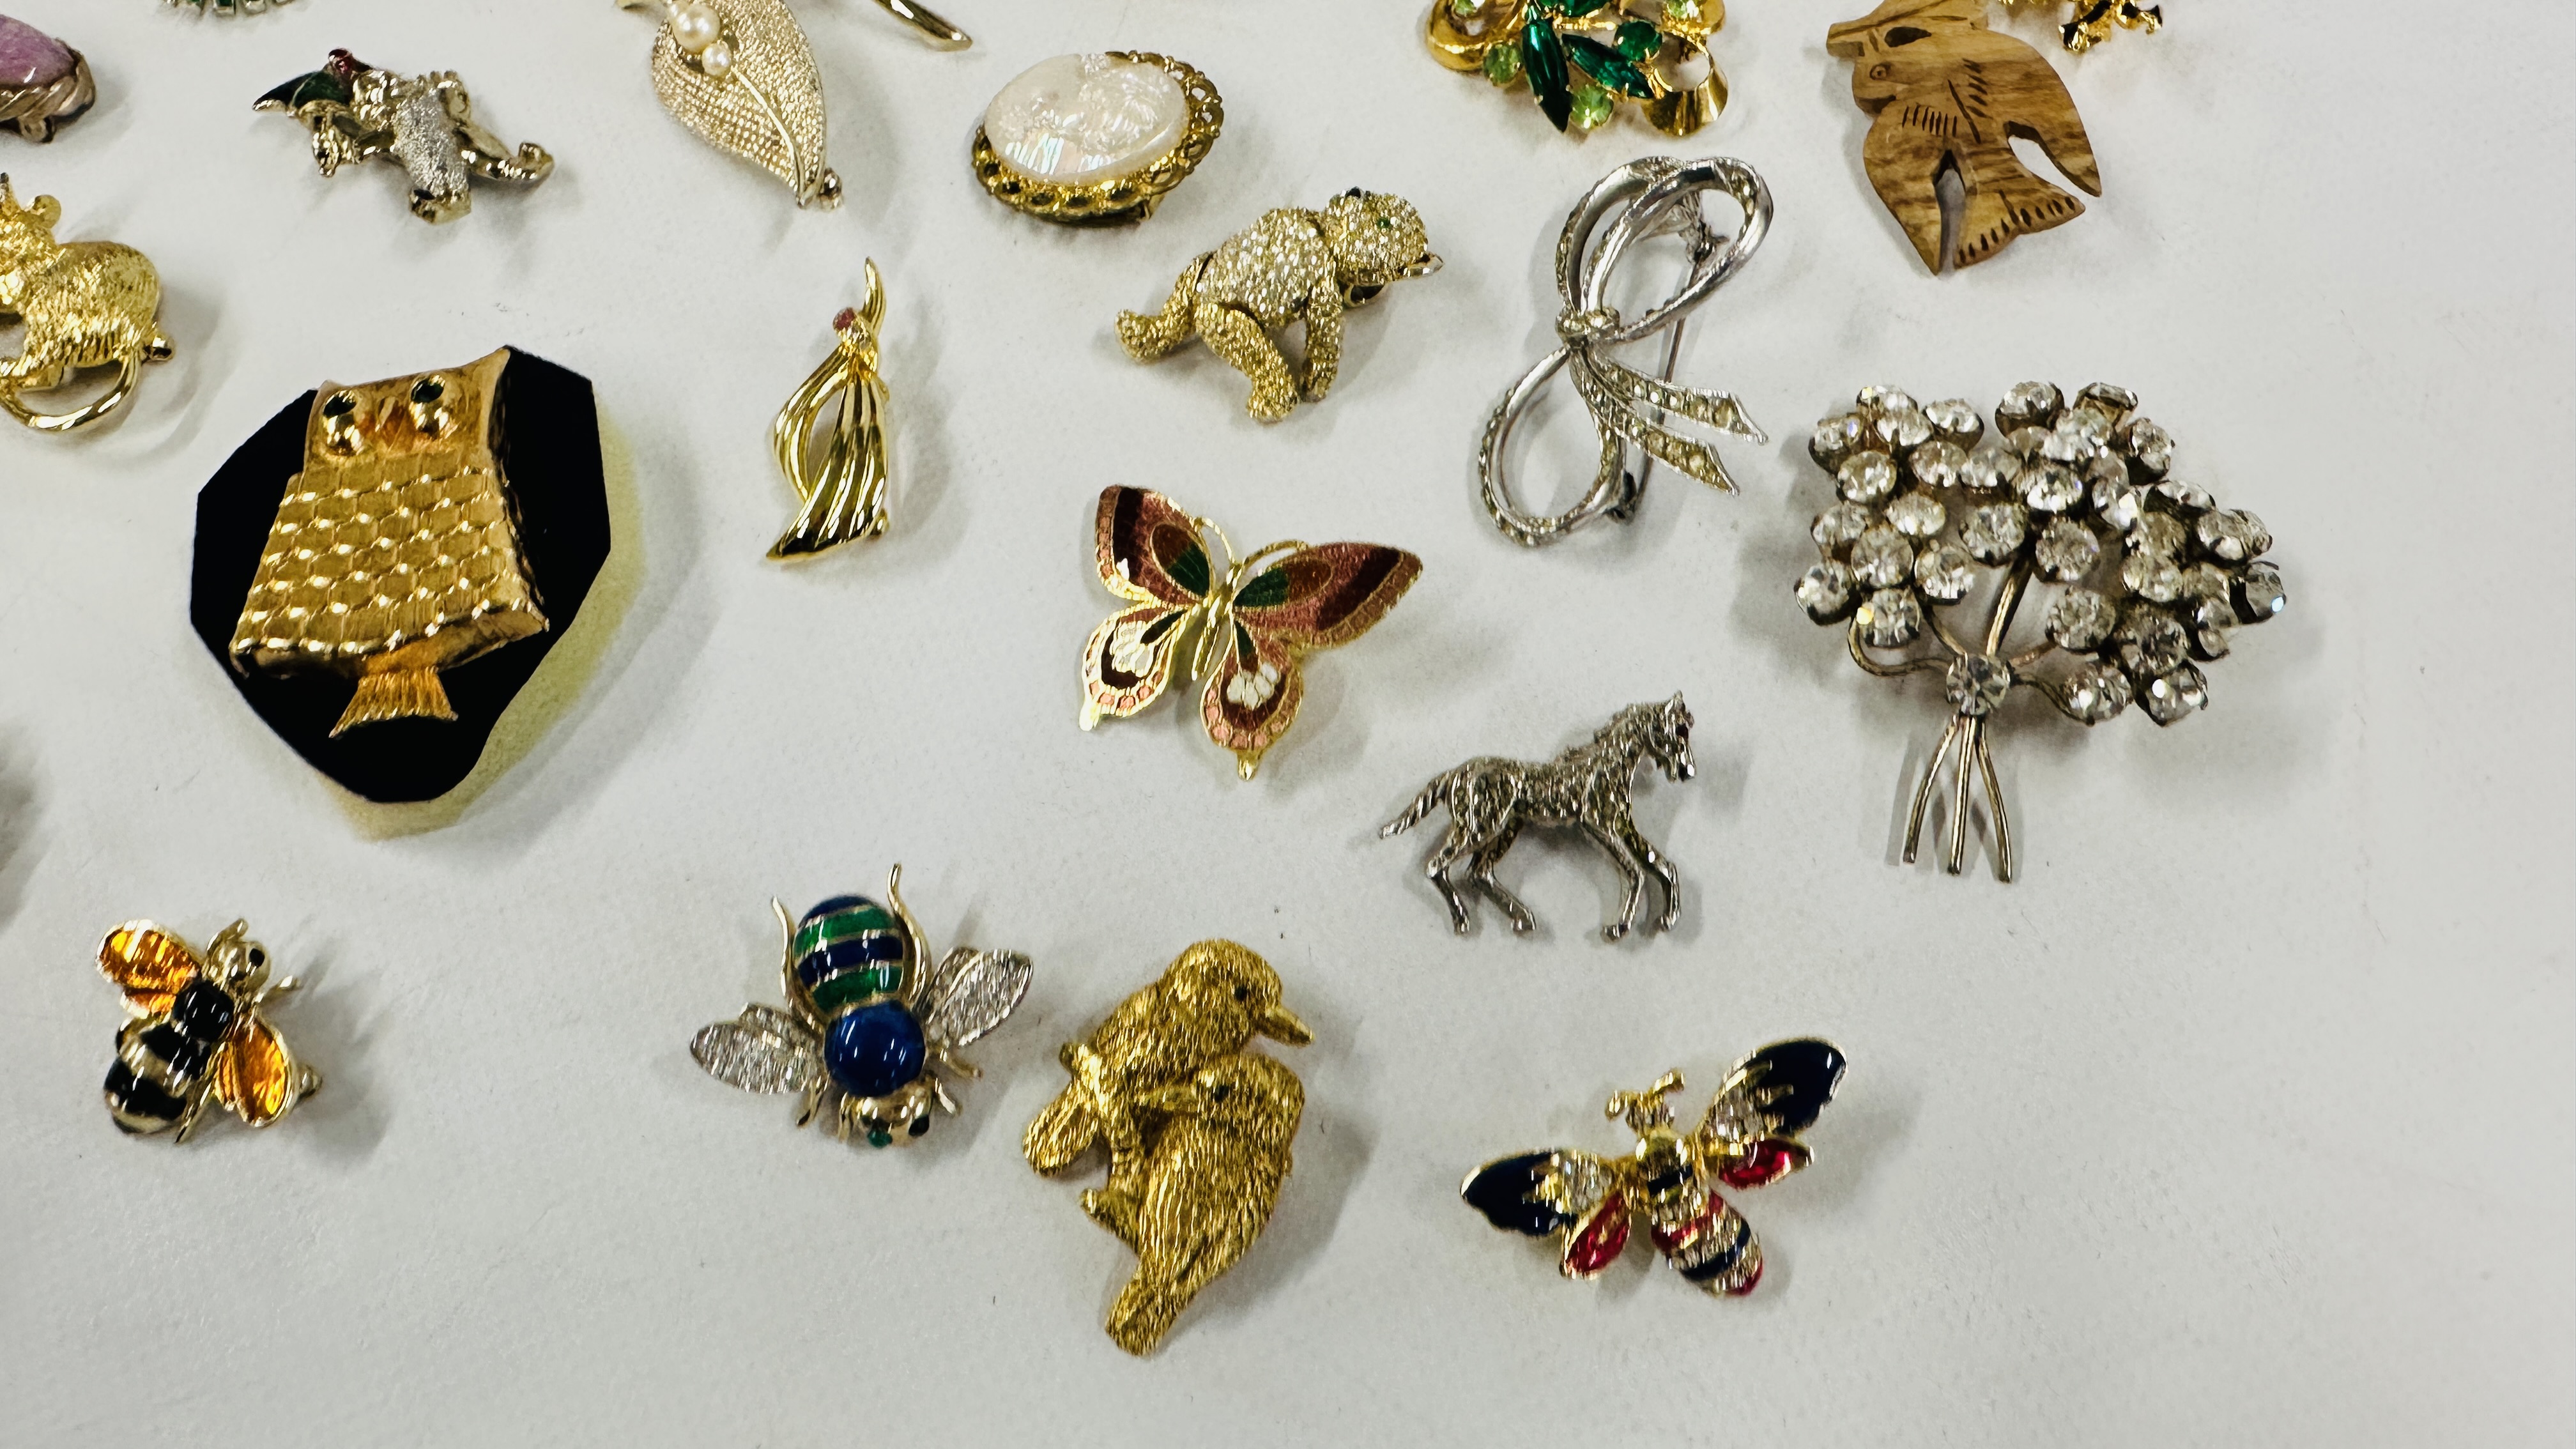 33 VINTAGE BROOCHES, BEES, TEDDY BEAR, ANIMALS ETC. - Image 8 of 9